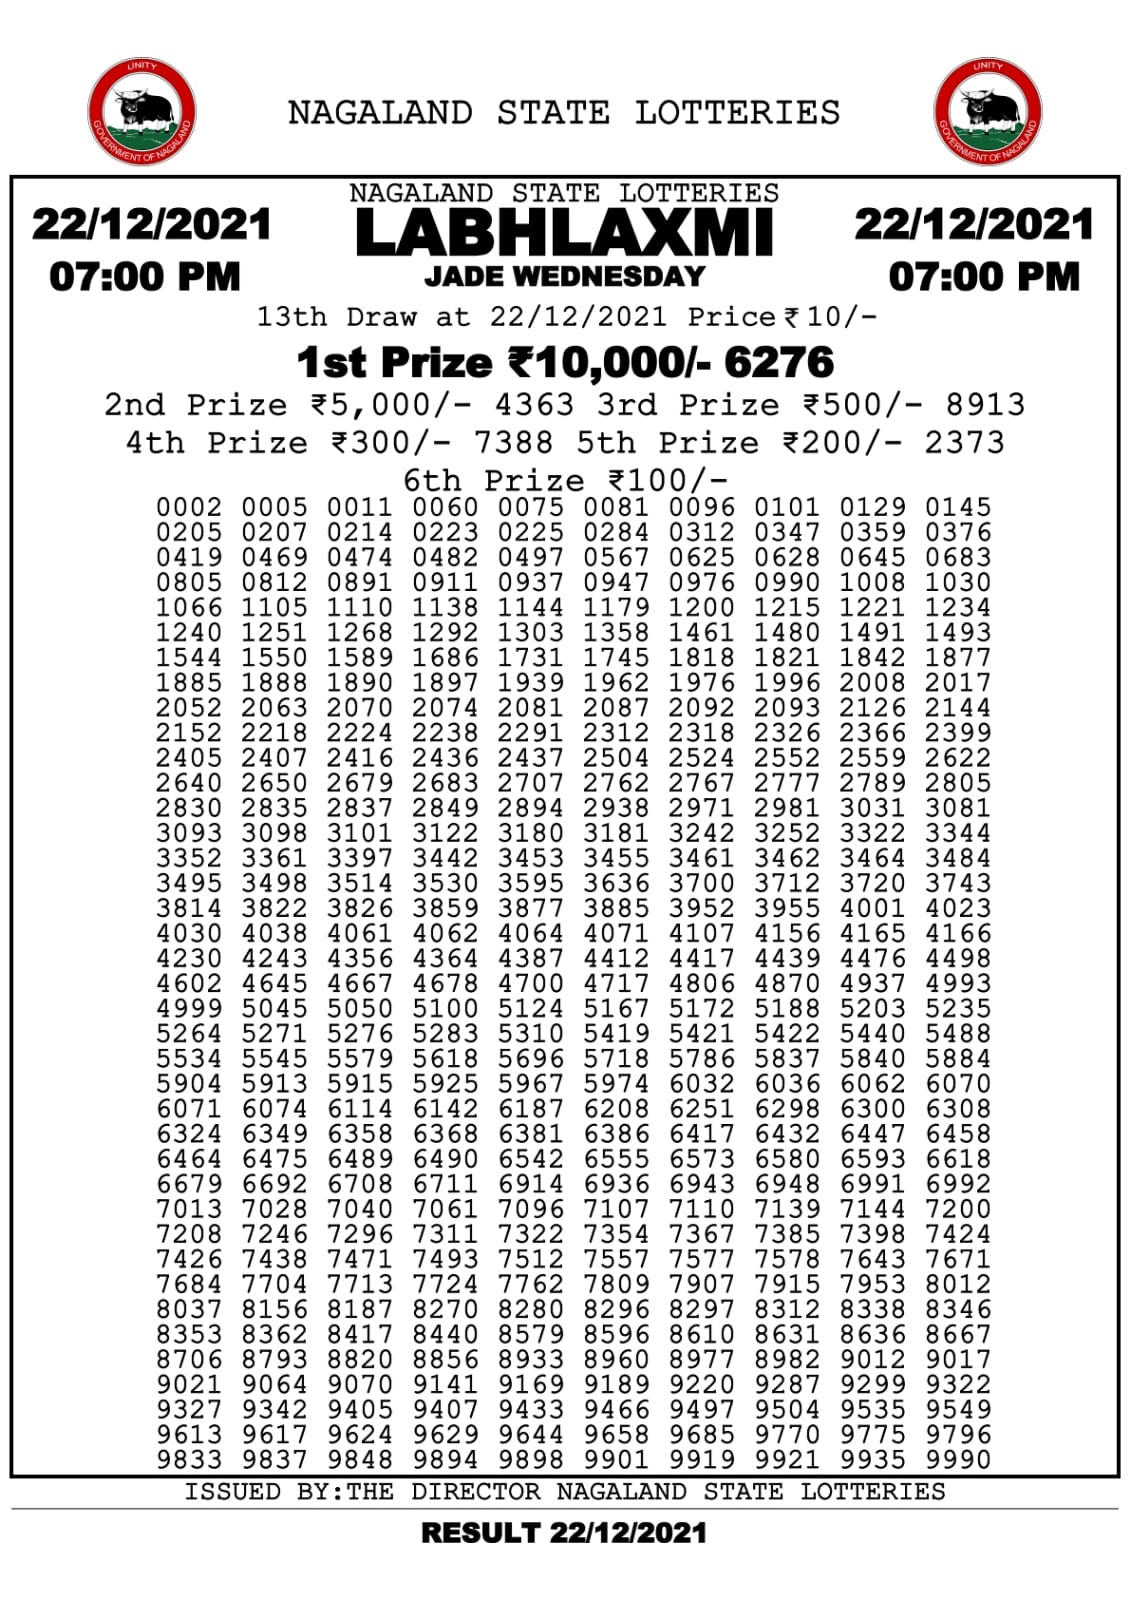 Labhlaxmi 7.00pm Lottery Result 22.12.2021